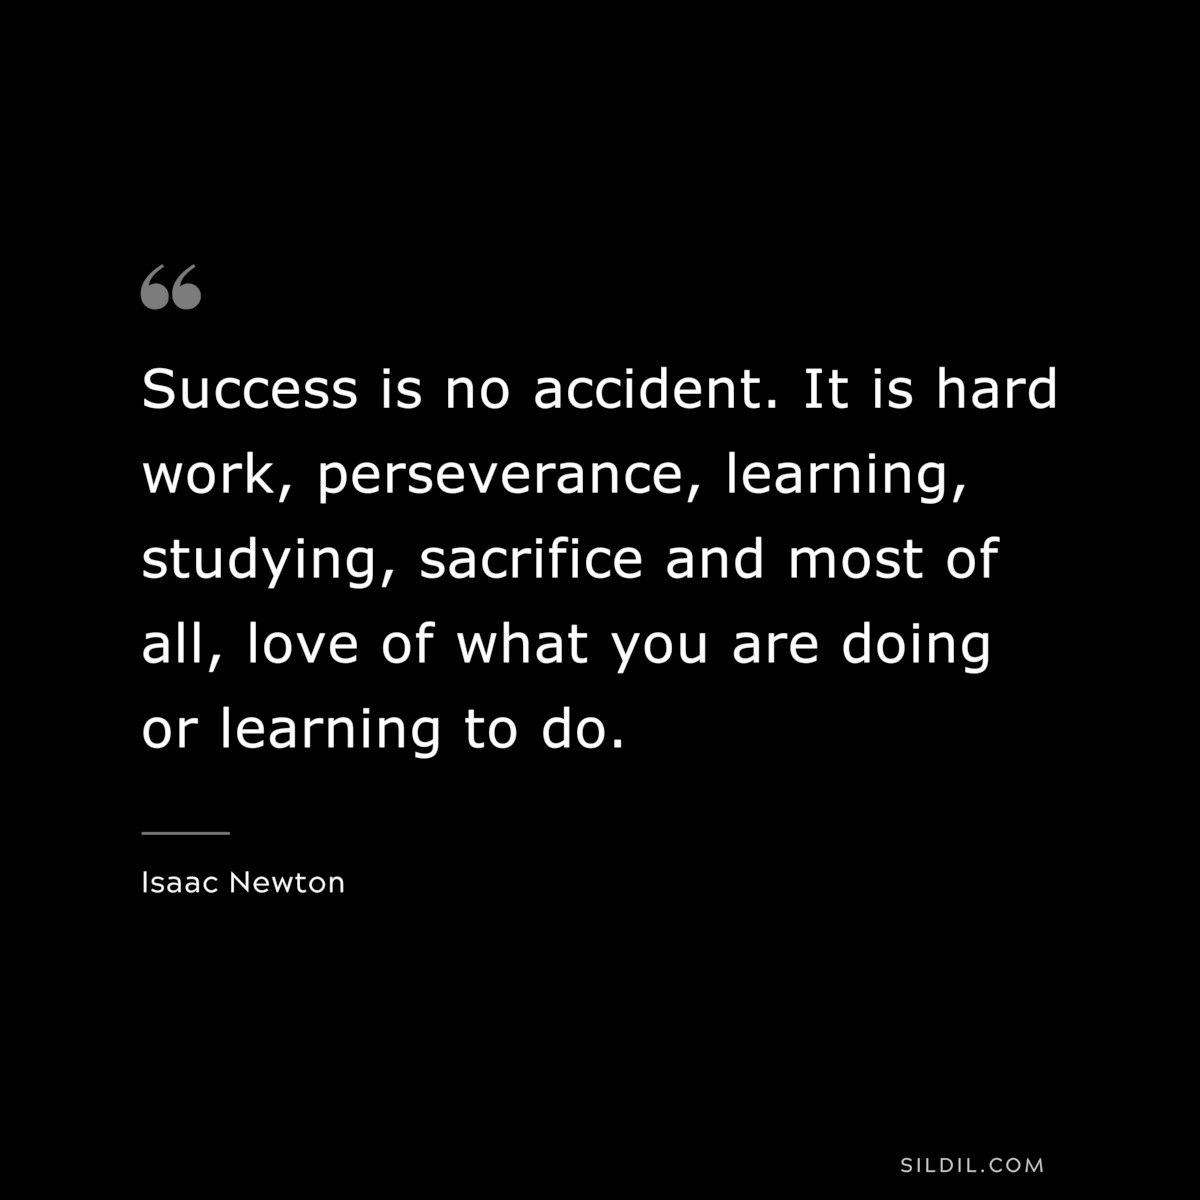 Success is no accident. It is hard work, perseverance, learning, studying, sacrifice and most of all, love of what you are doing or learning to do. ― Pele